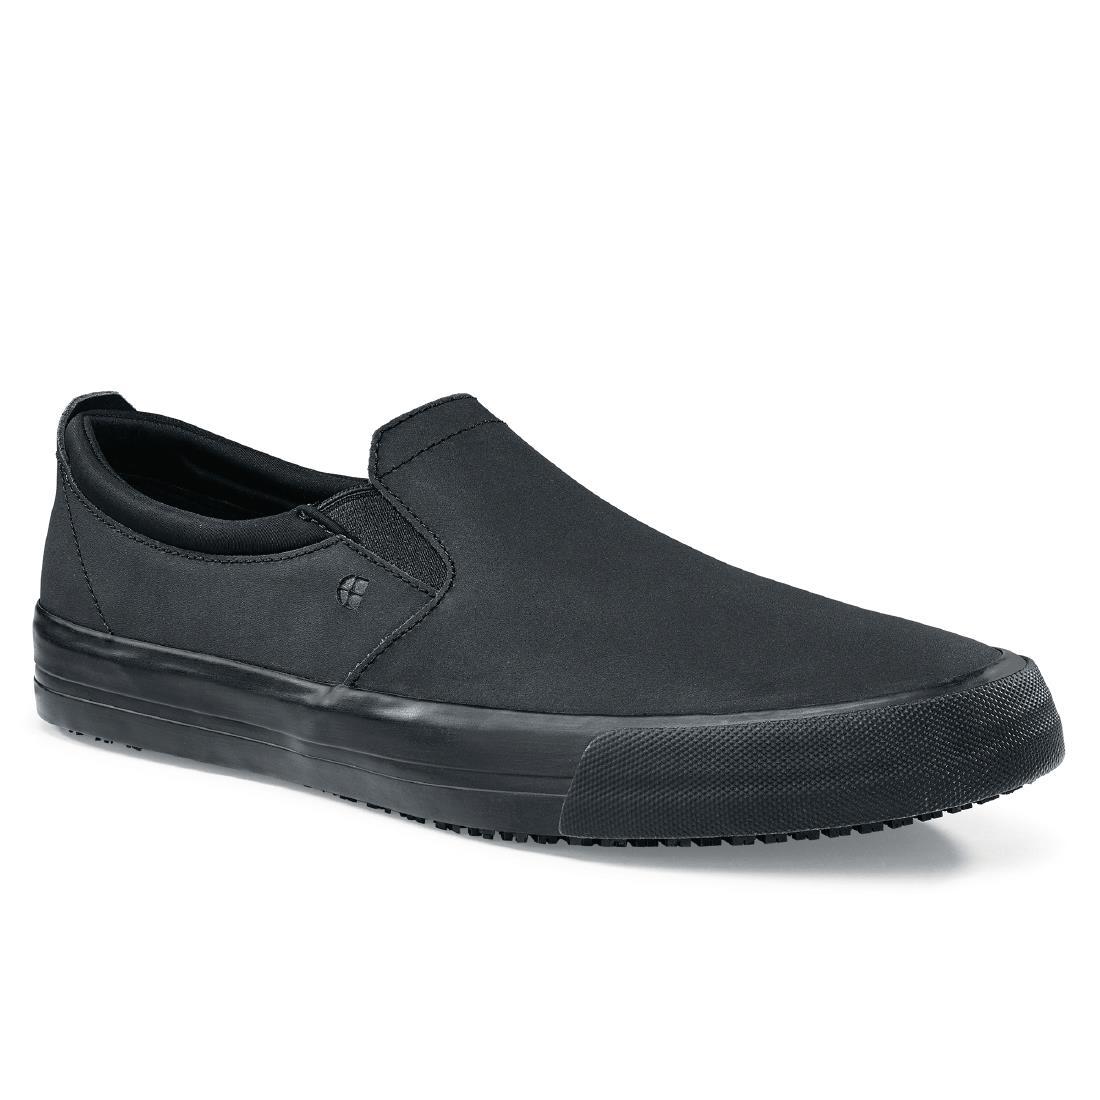 Shoes for Crews Leather Slip On Size 45 - BB163-45  - 1